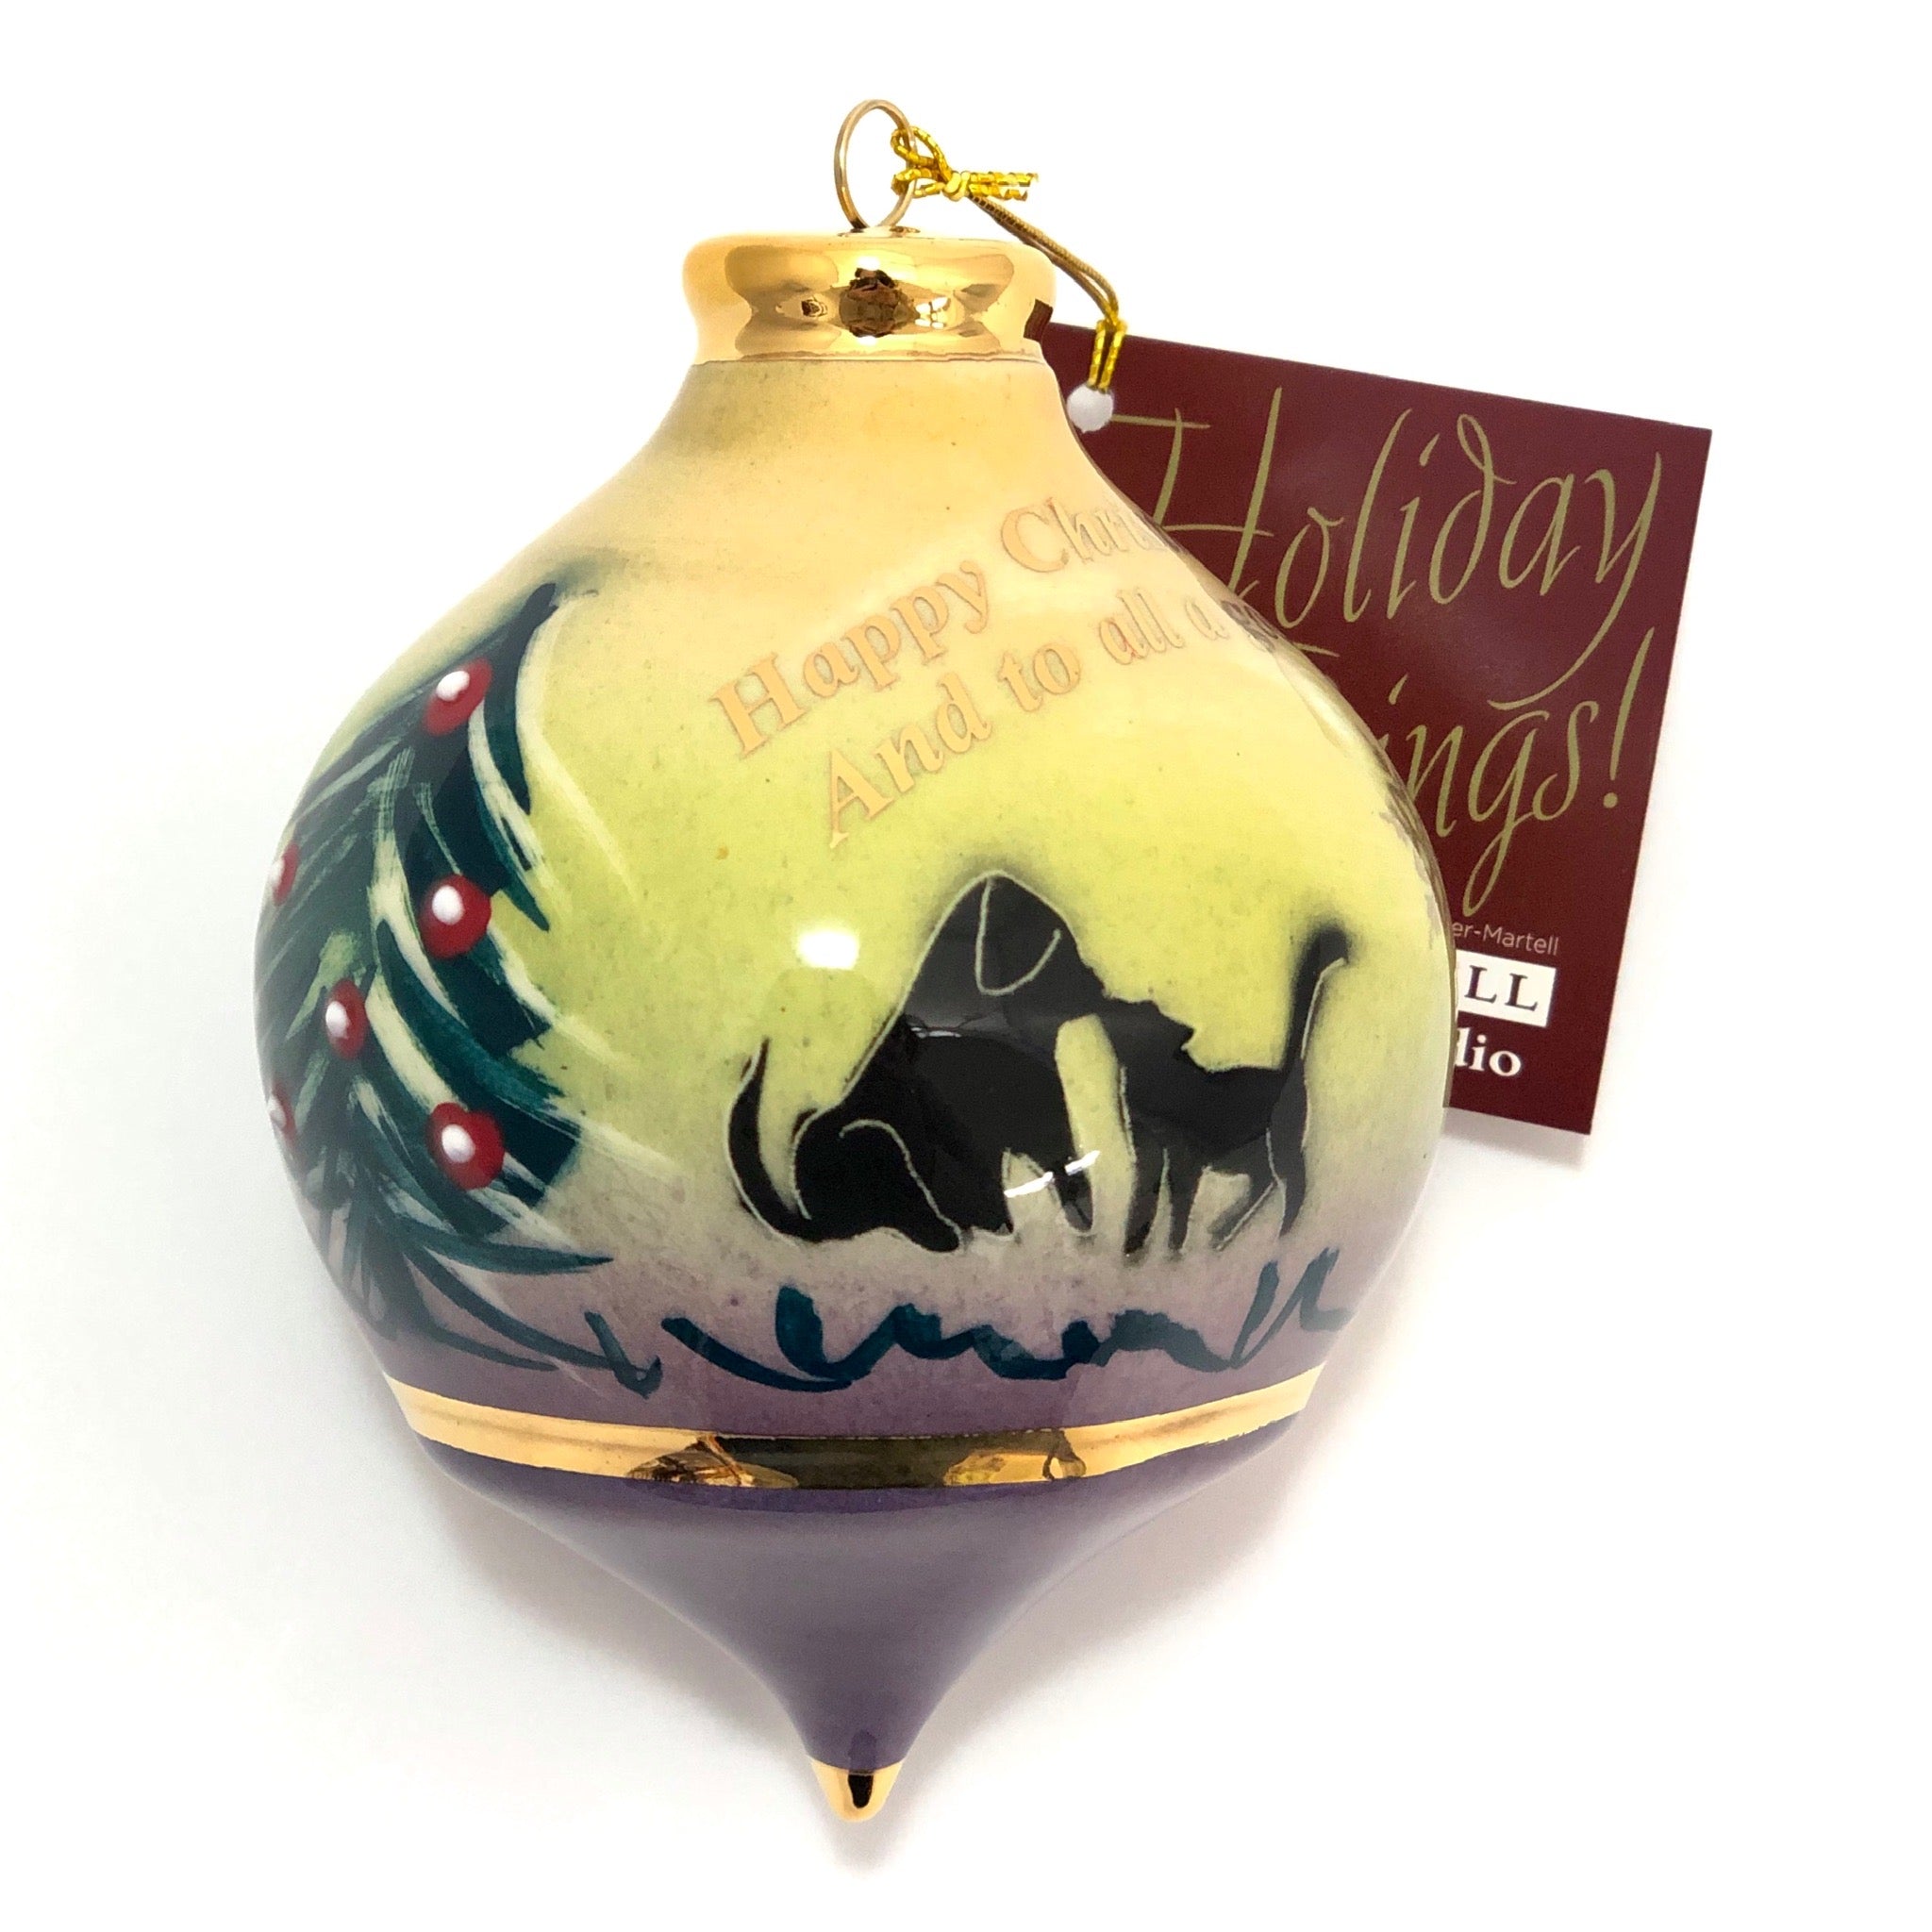 Bulb Ornament (“And to All a Good Night”)